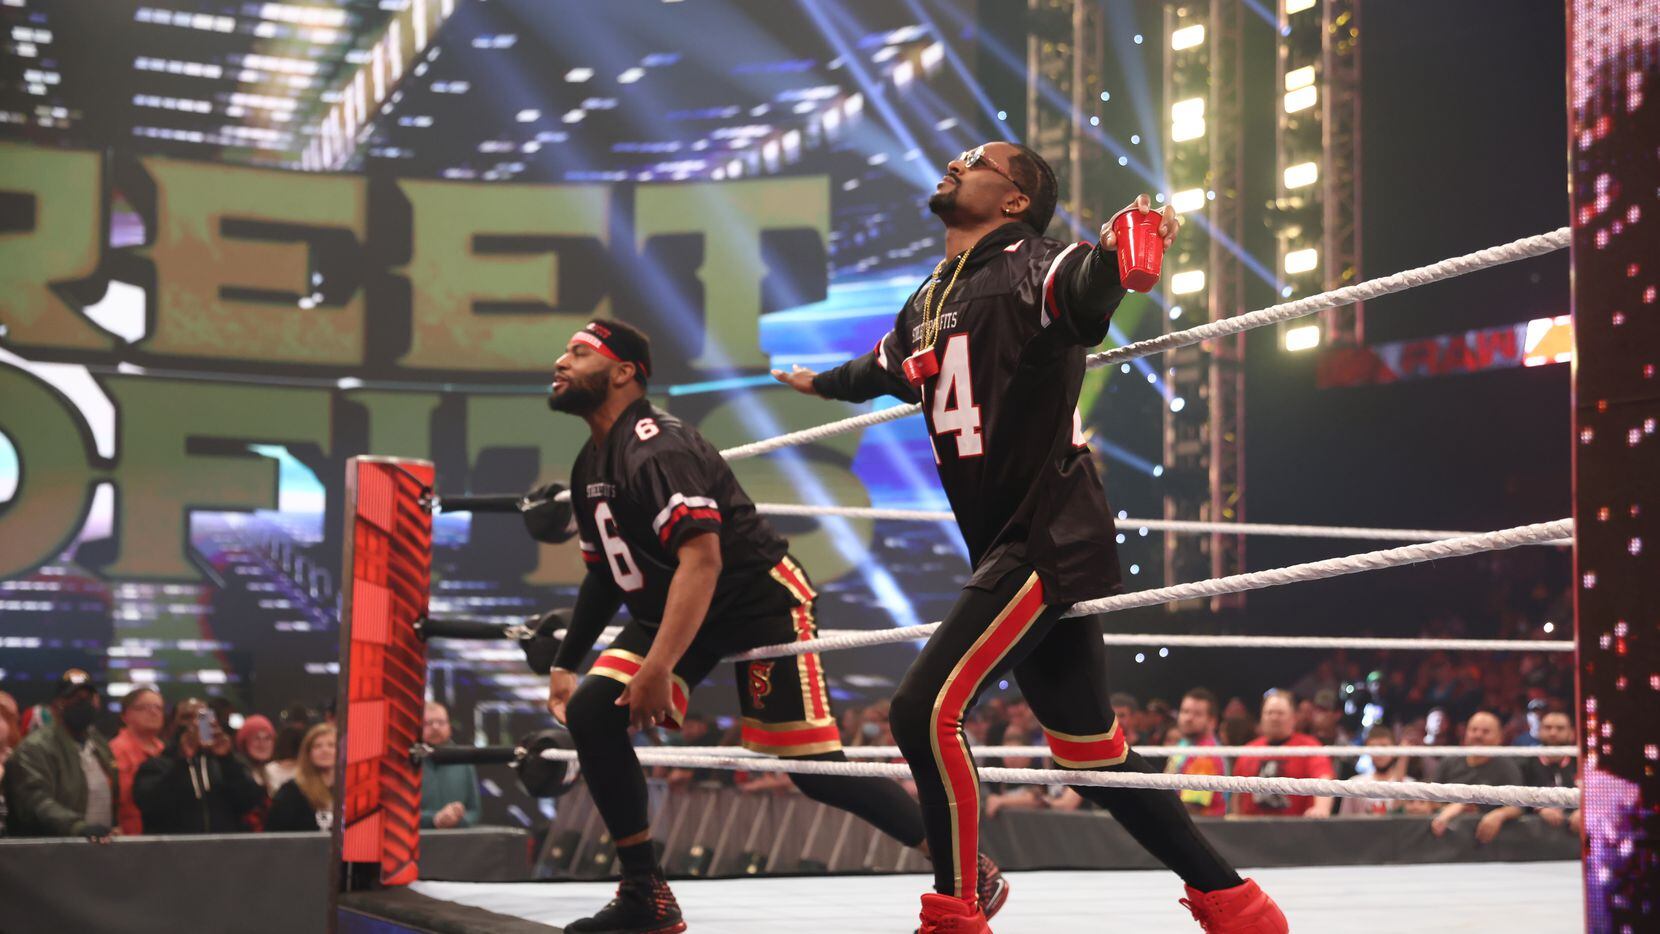 The Street Profits, Angelo Dawkins (left) and Montez Ford (right) enter the ring during an...